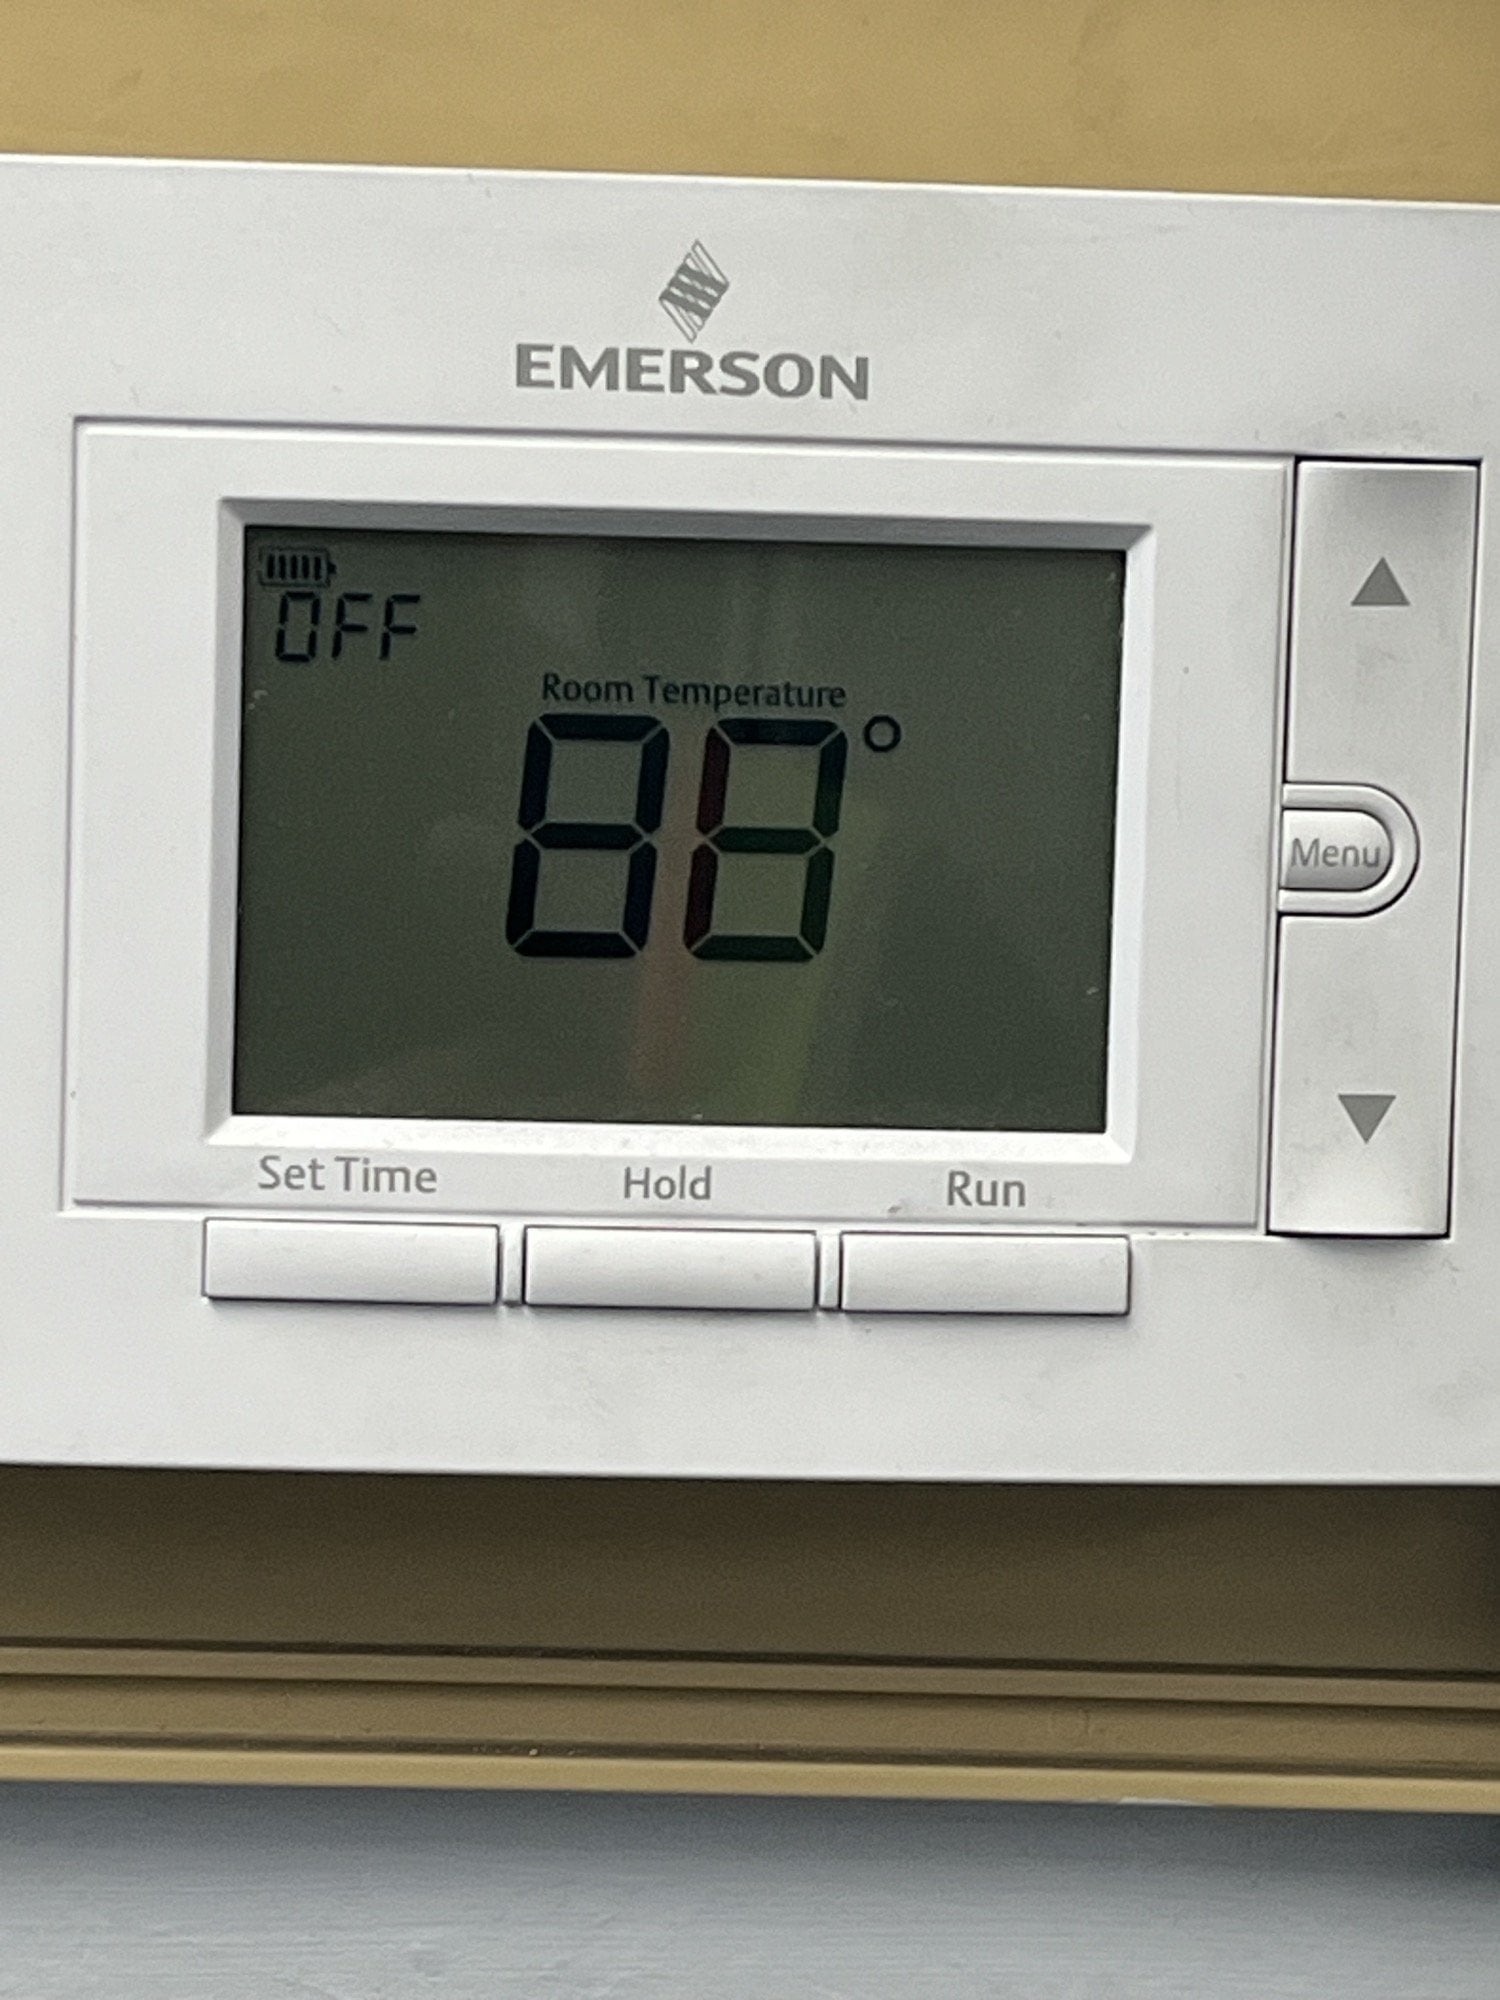 The thermostat says 88 degrees